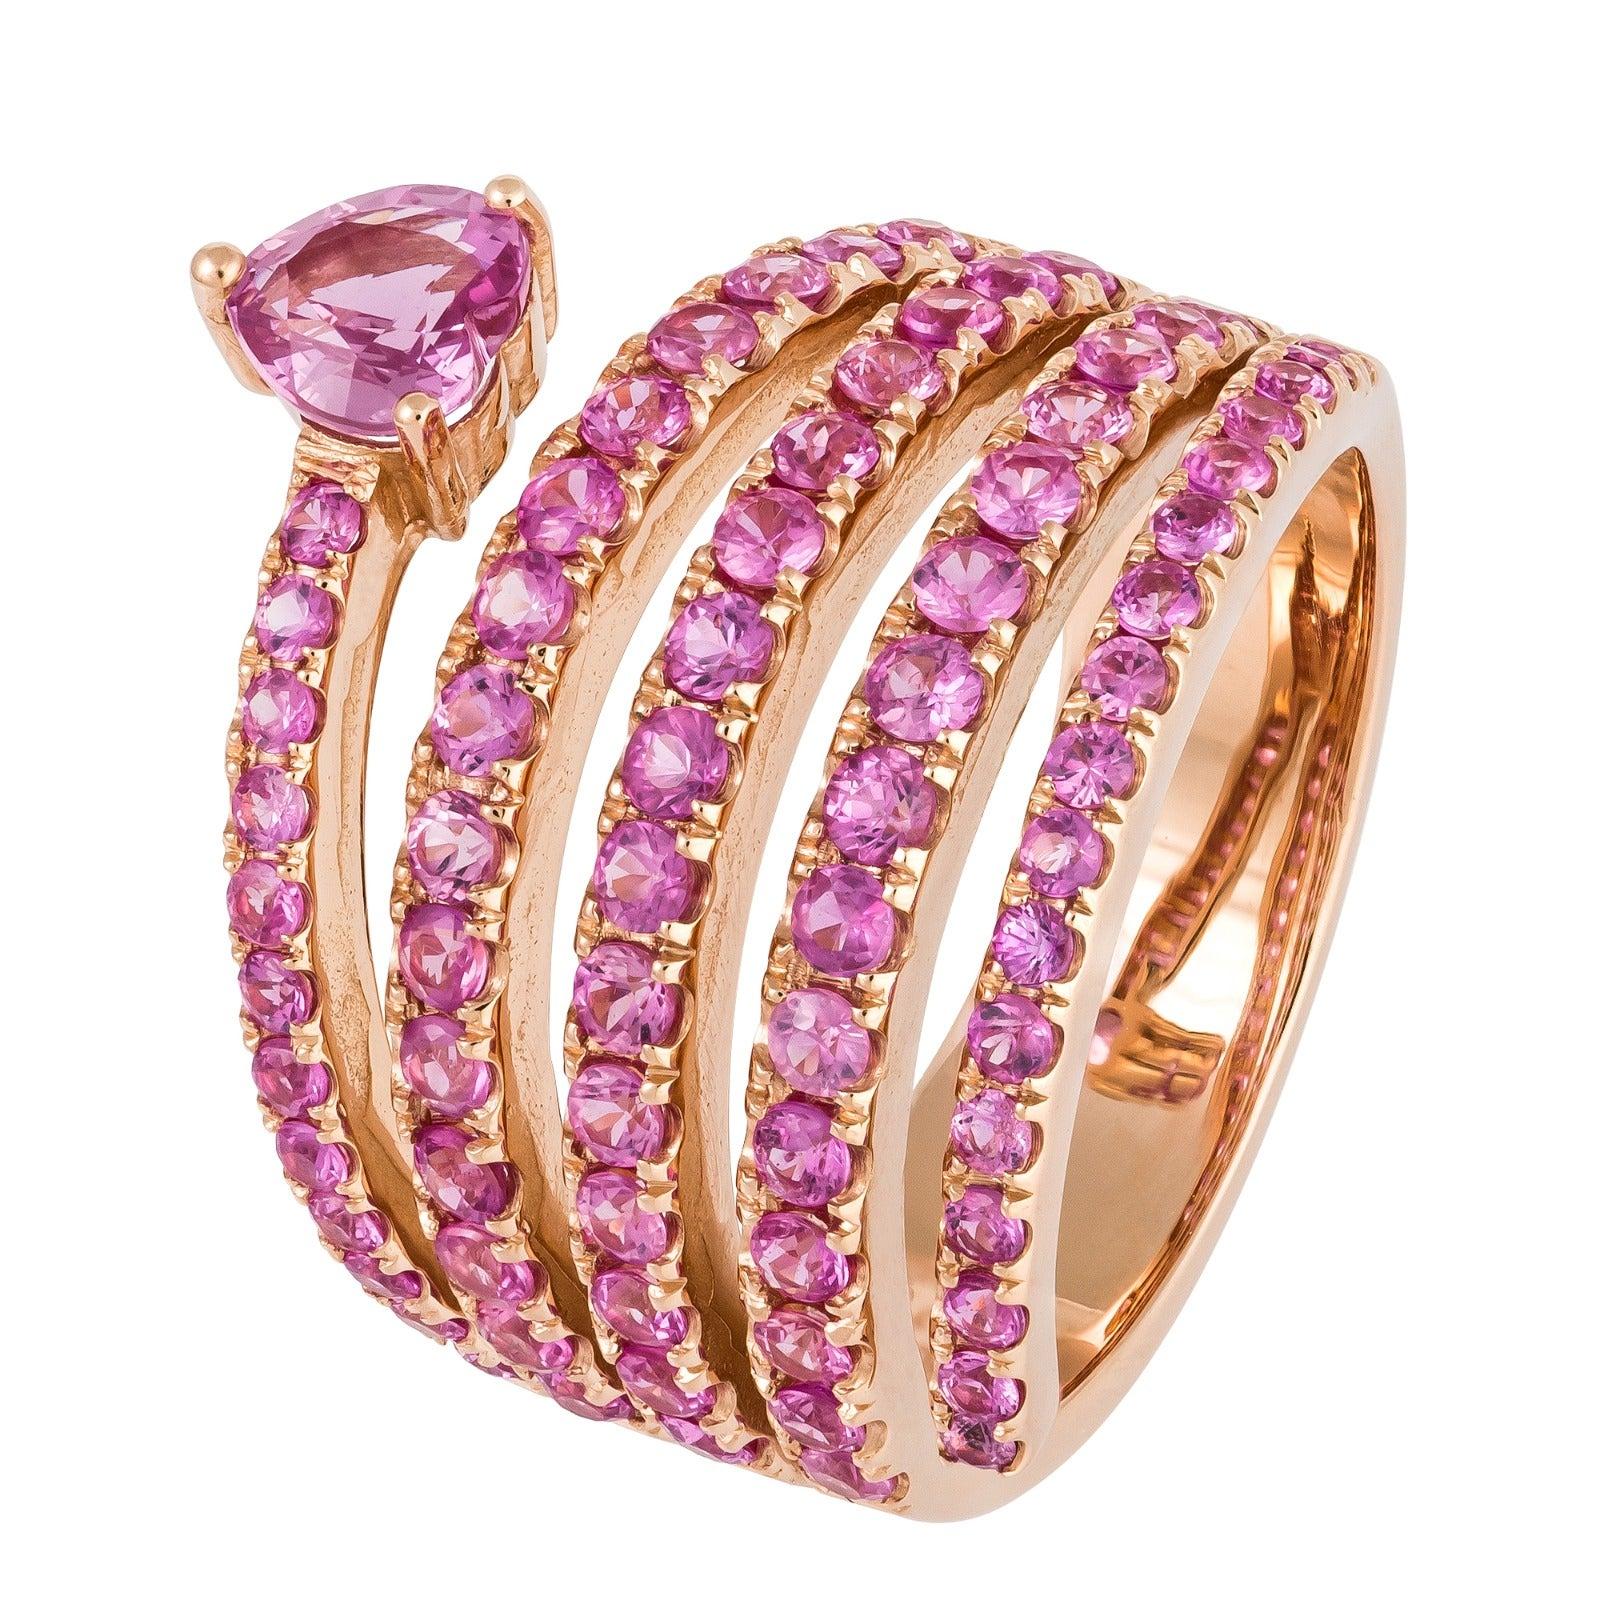 Stylish Fashionable Pink Sapphire Statement Rose Gold Ring for Her